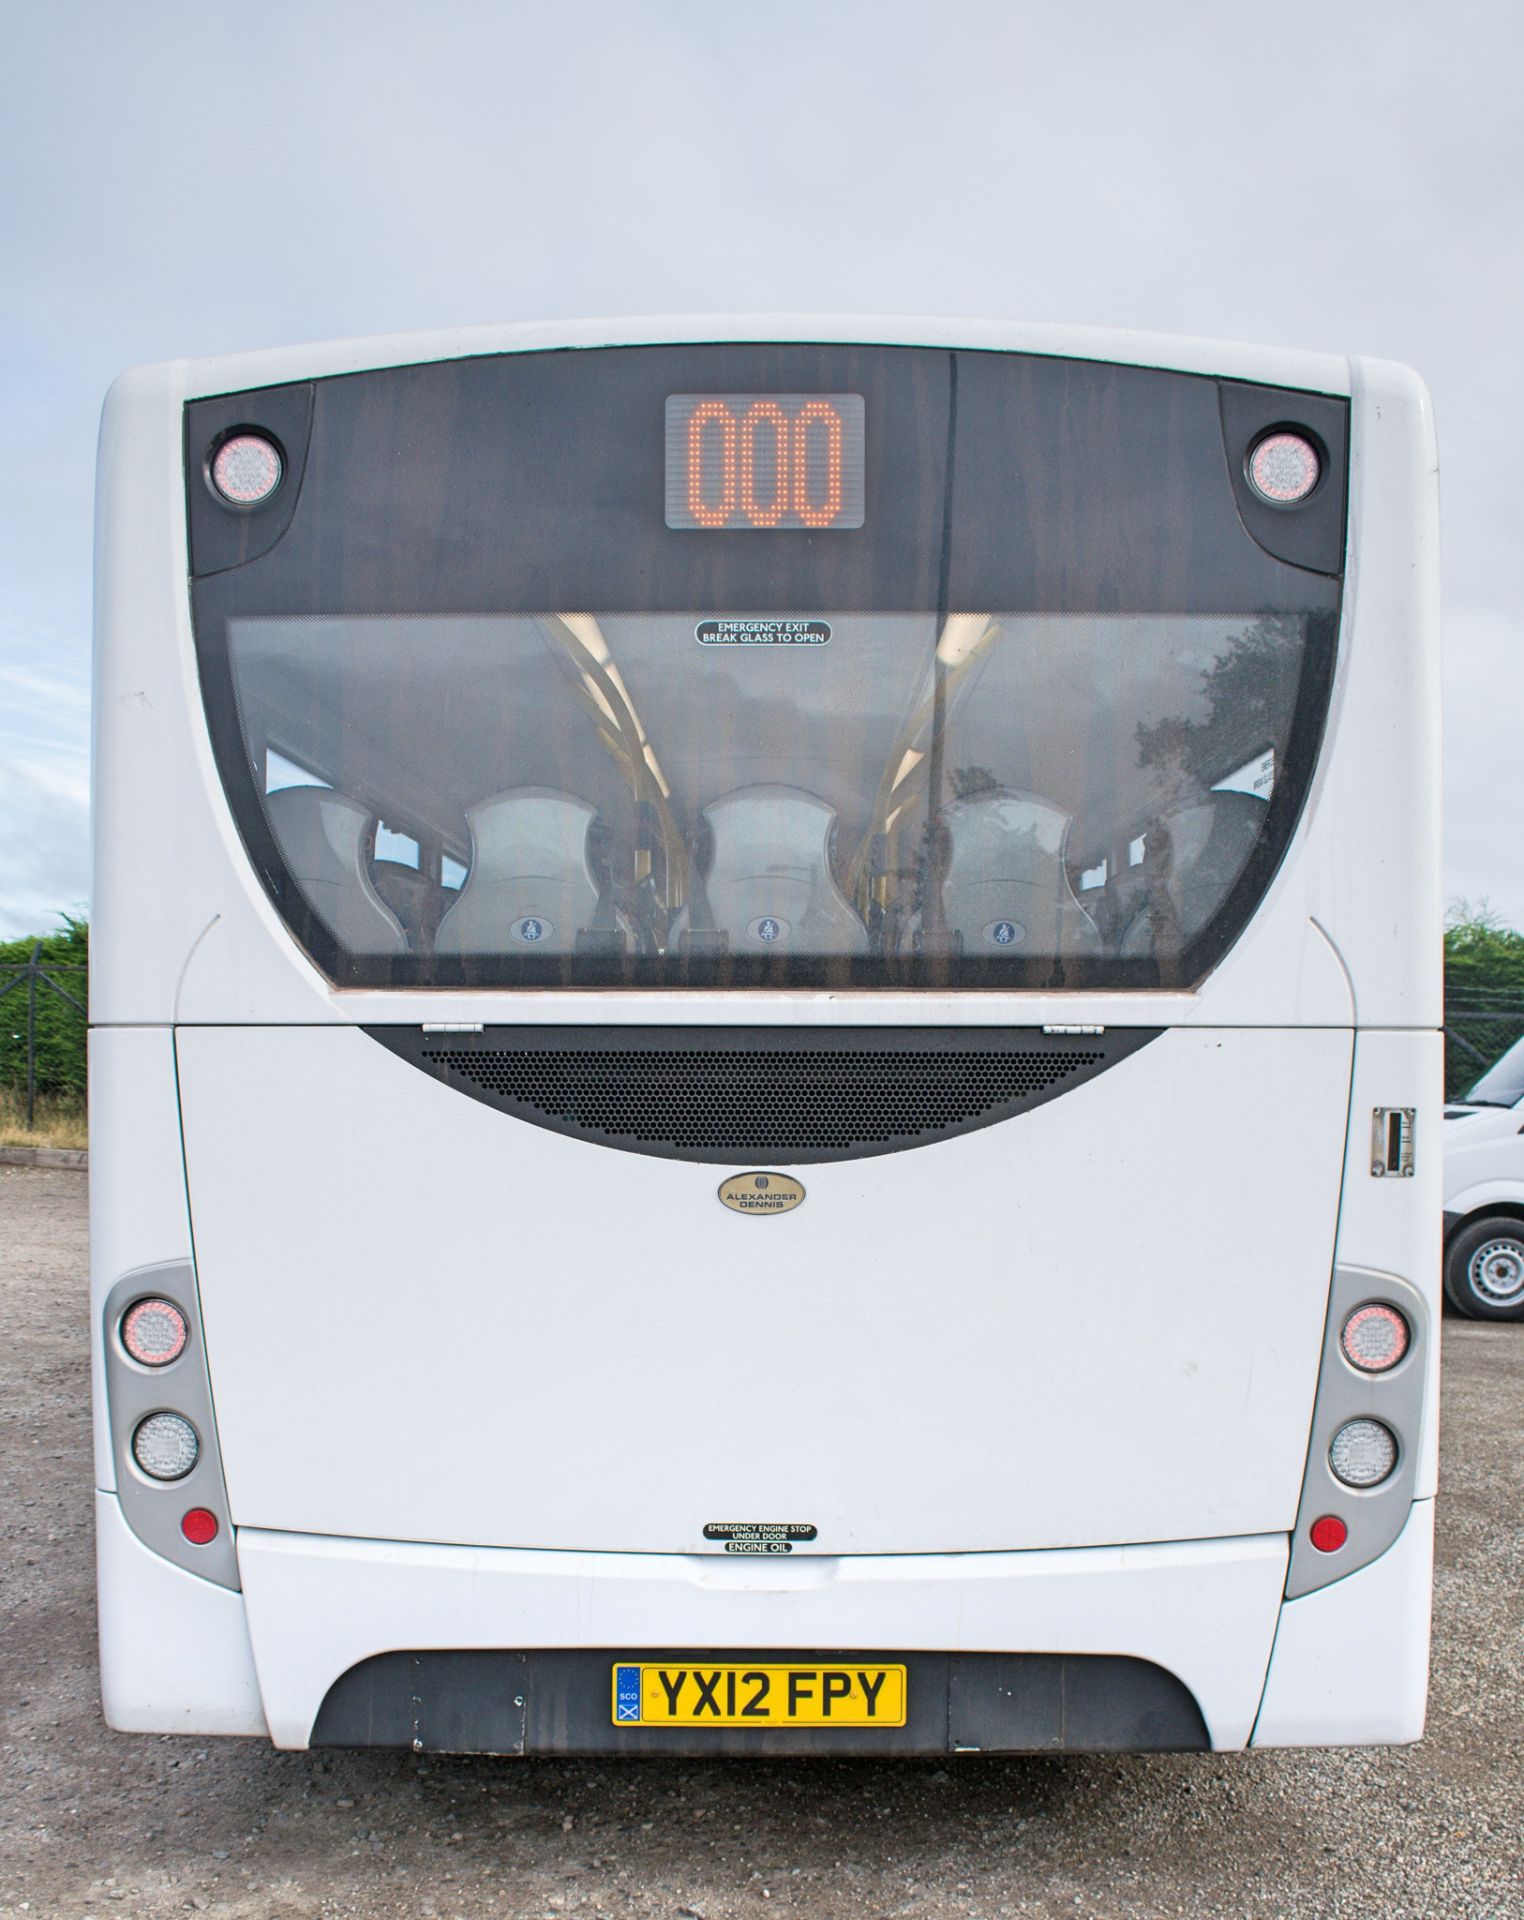 ADL Enviro 200 26/29 seat single deck service bus Registration Number: YX12 FPY Date of - Image 6 of 9